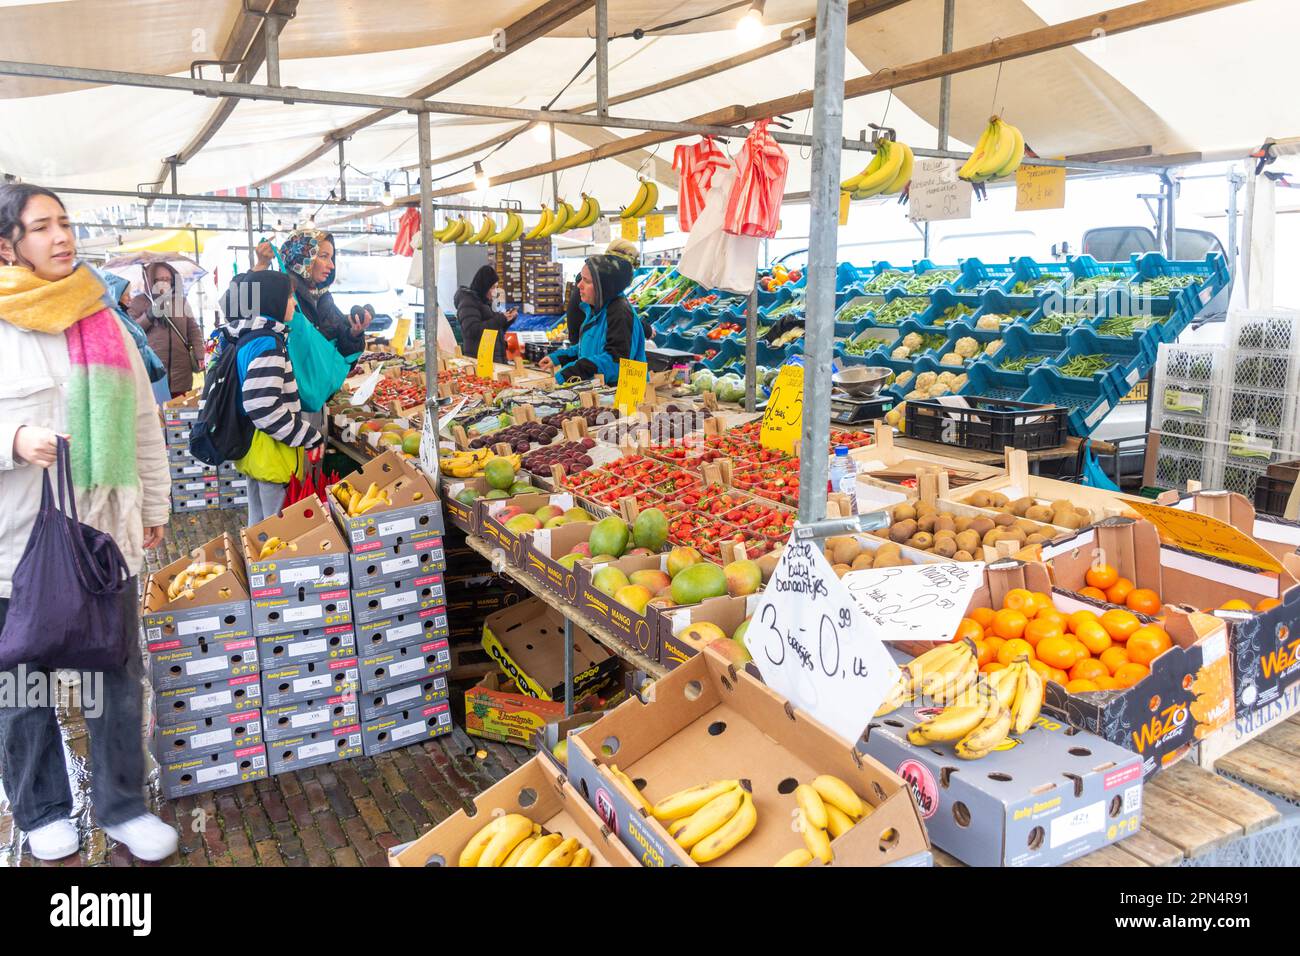 Fruit and vegetable counter, Markt, Delft, South Holland Province, Kingdom of the Netherlands Stock Photo